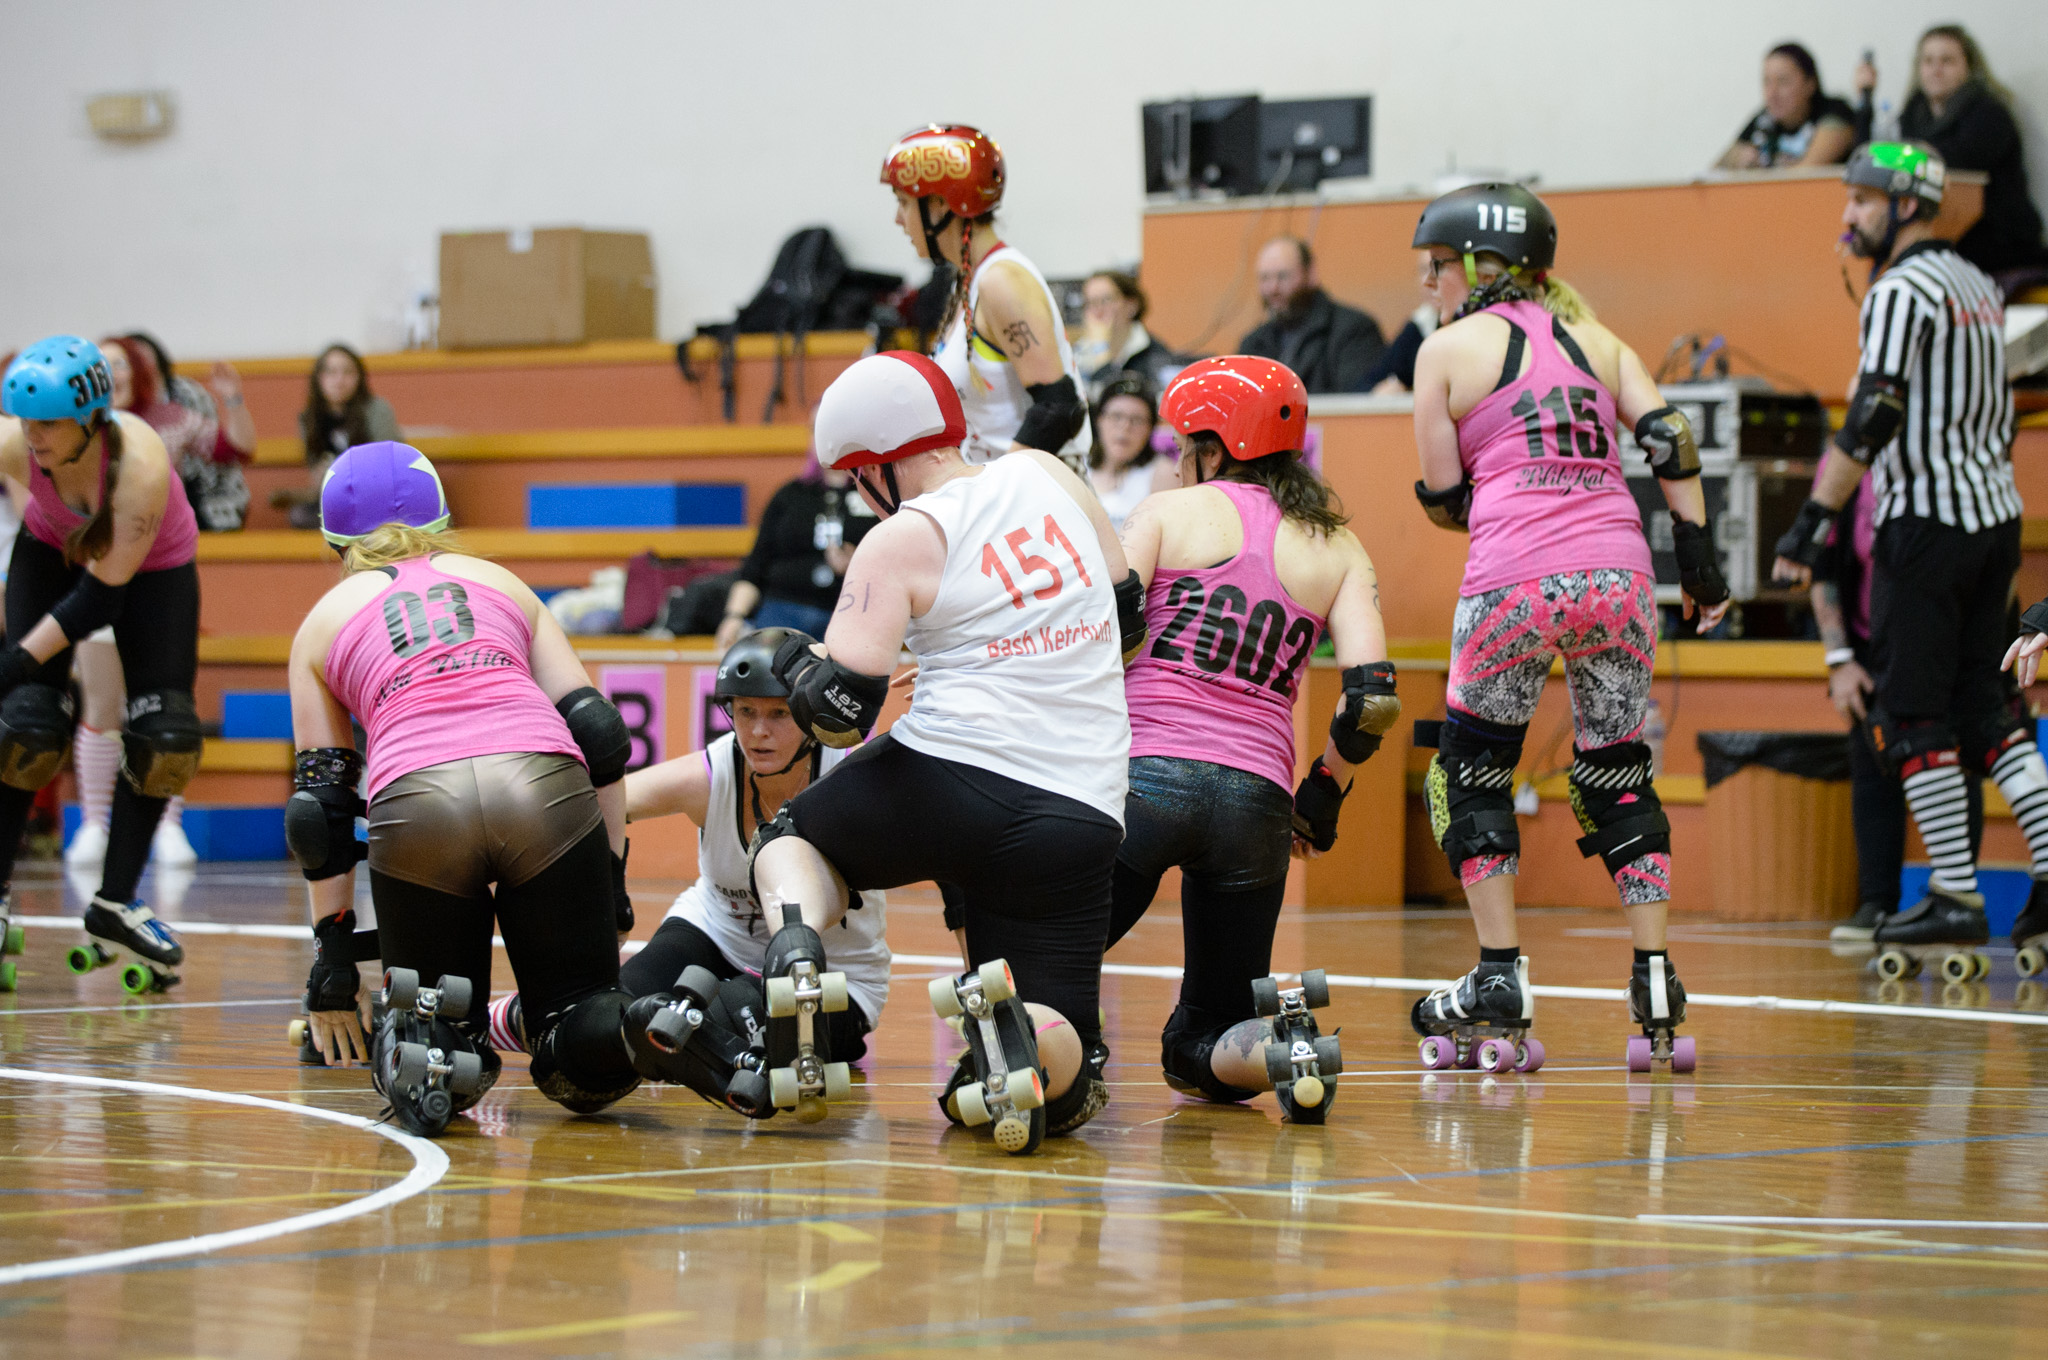 Candy Caners v Cherry Cola Rollers. Photographer: Brett Sargeant, D-eye Photography